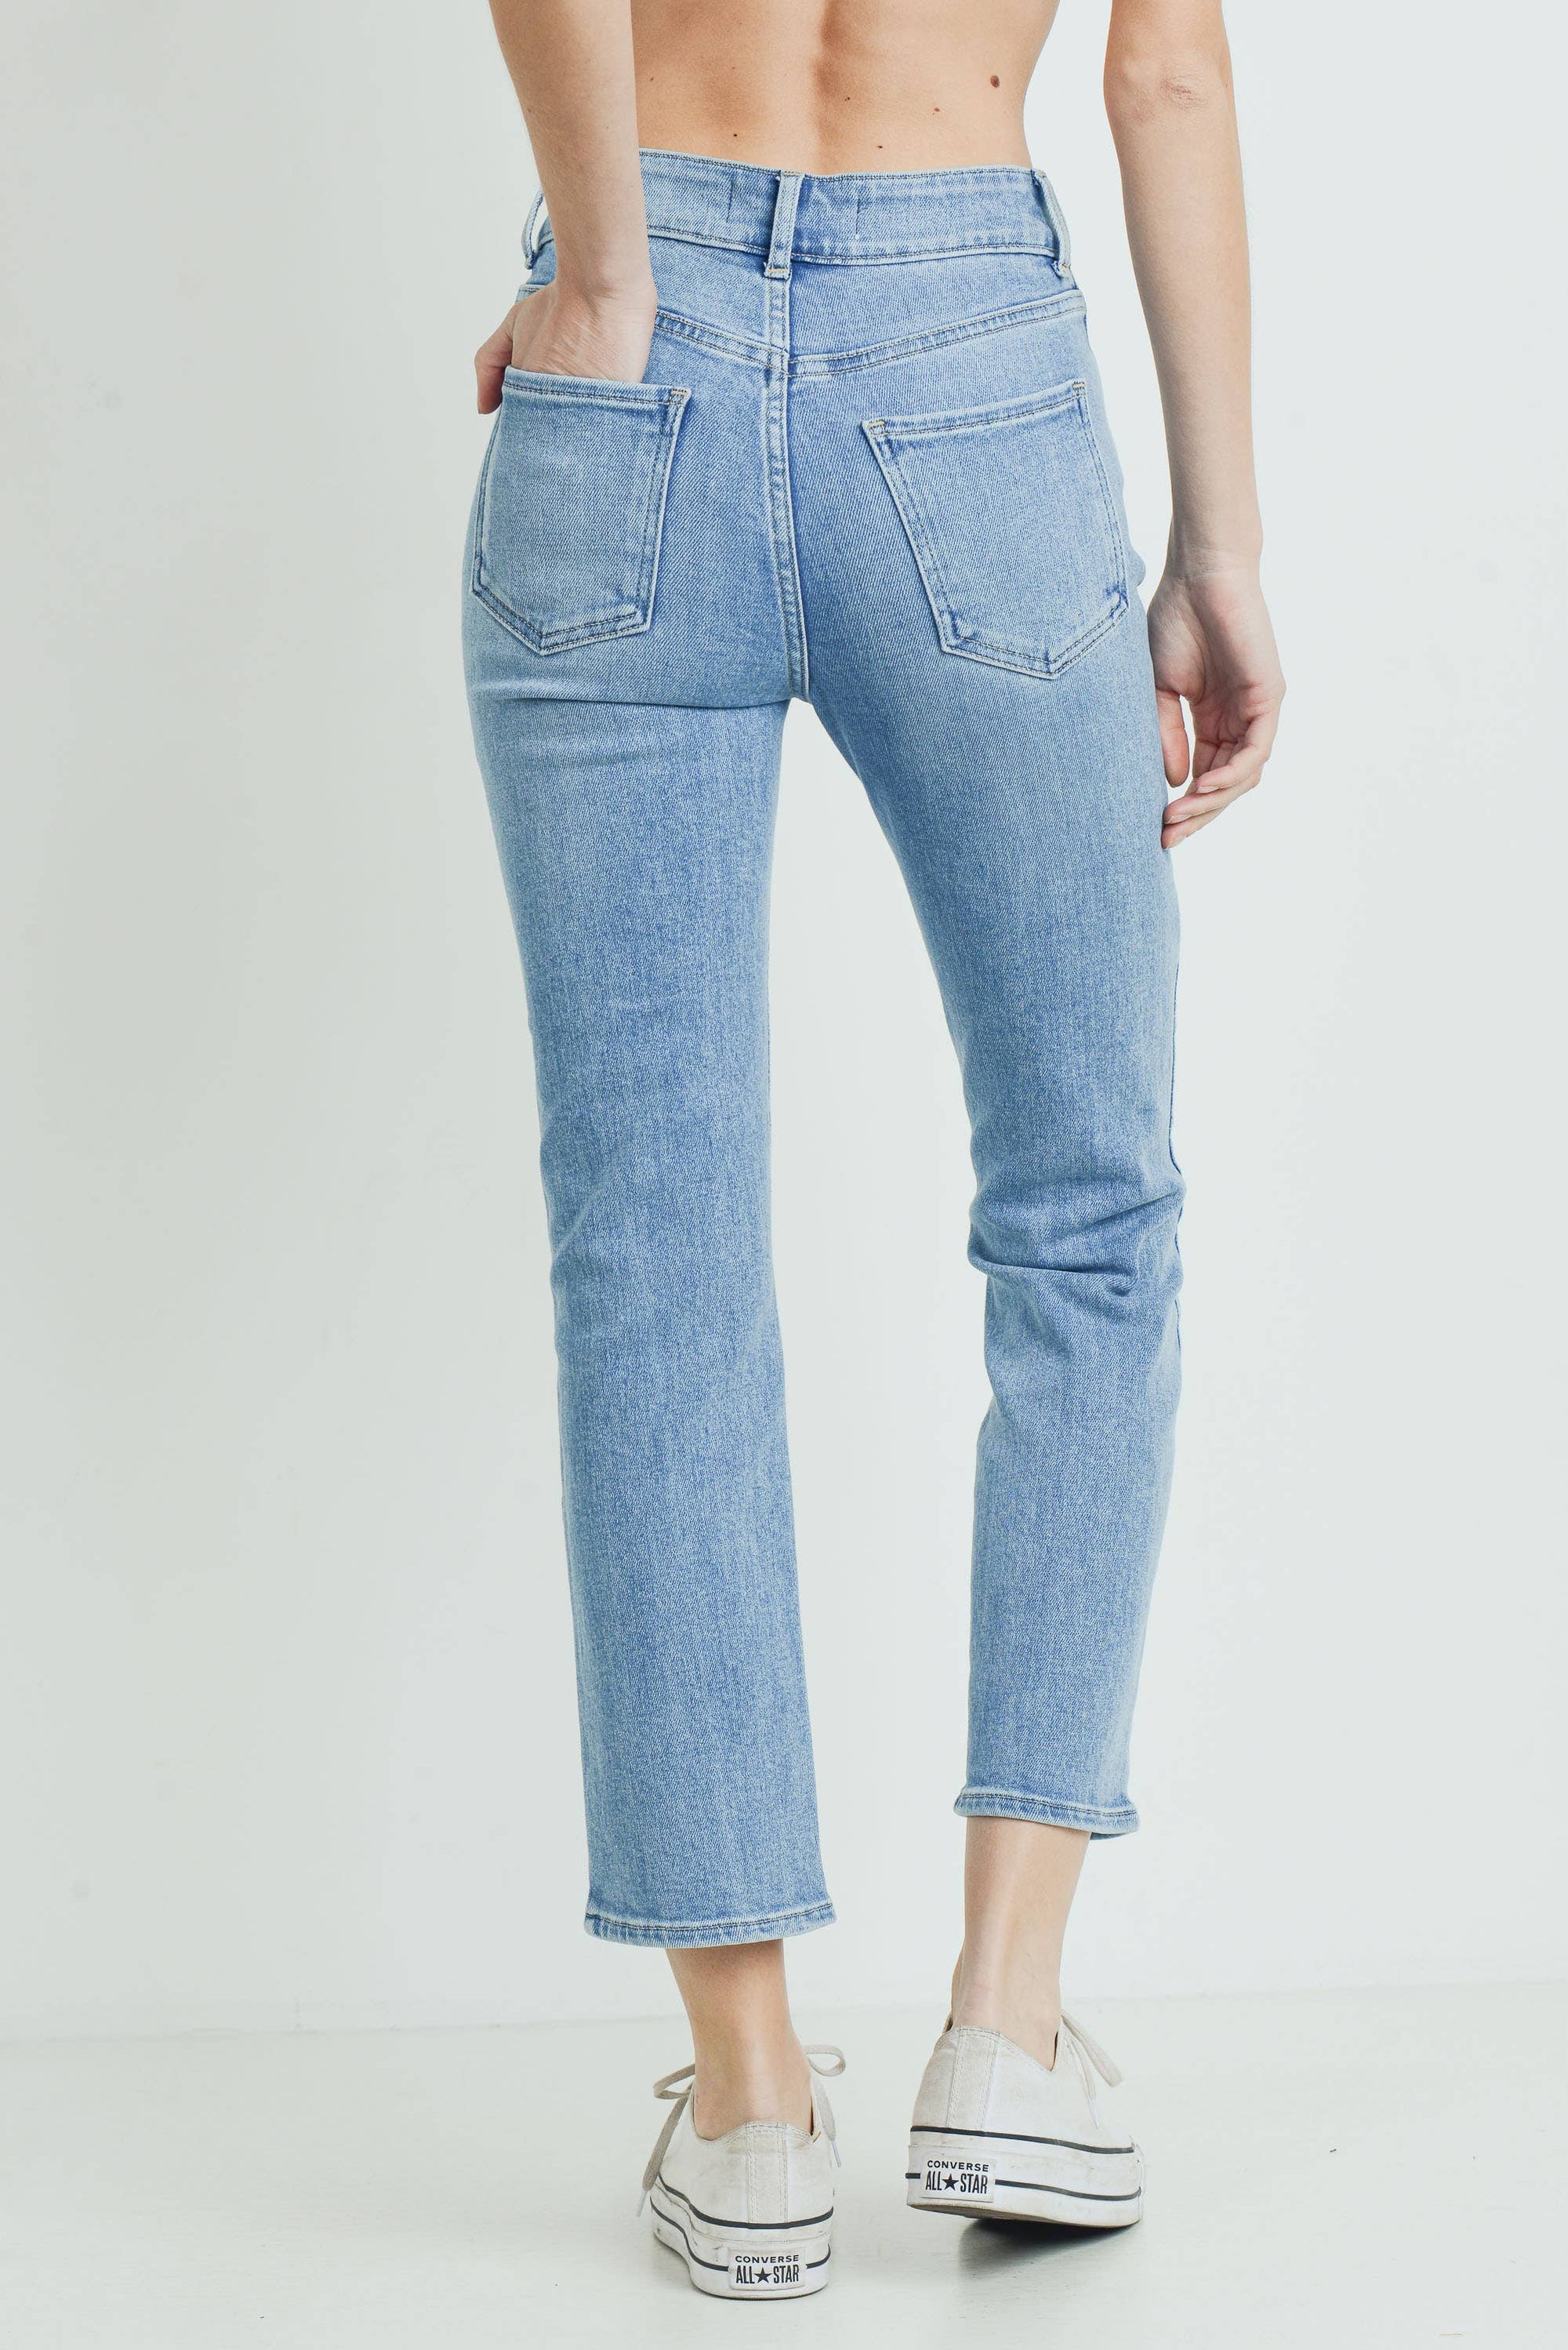 The Jude Double Button Straight Leg Jeans by Just Black Denim